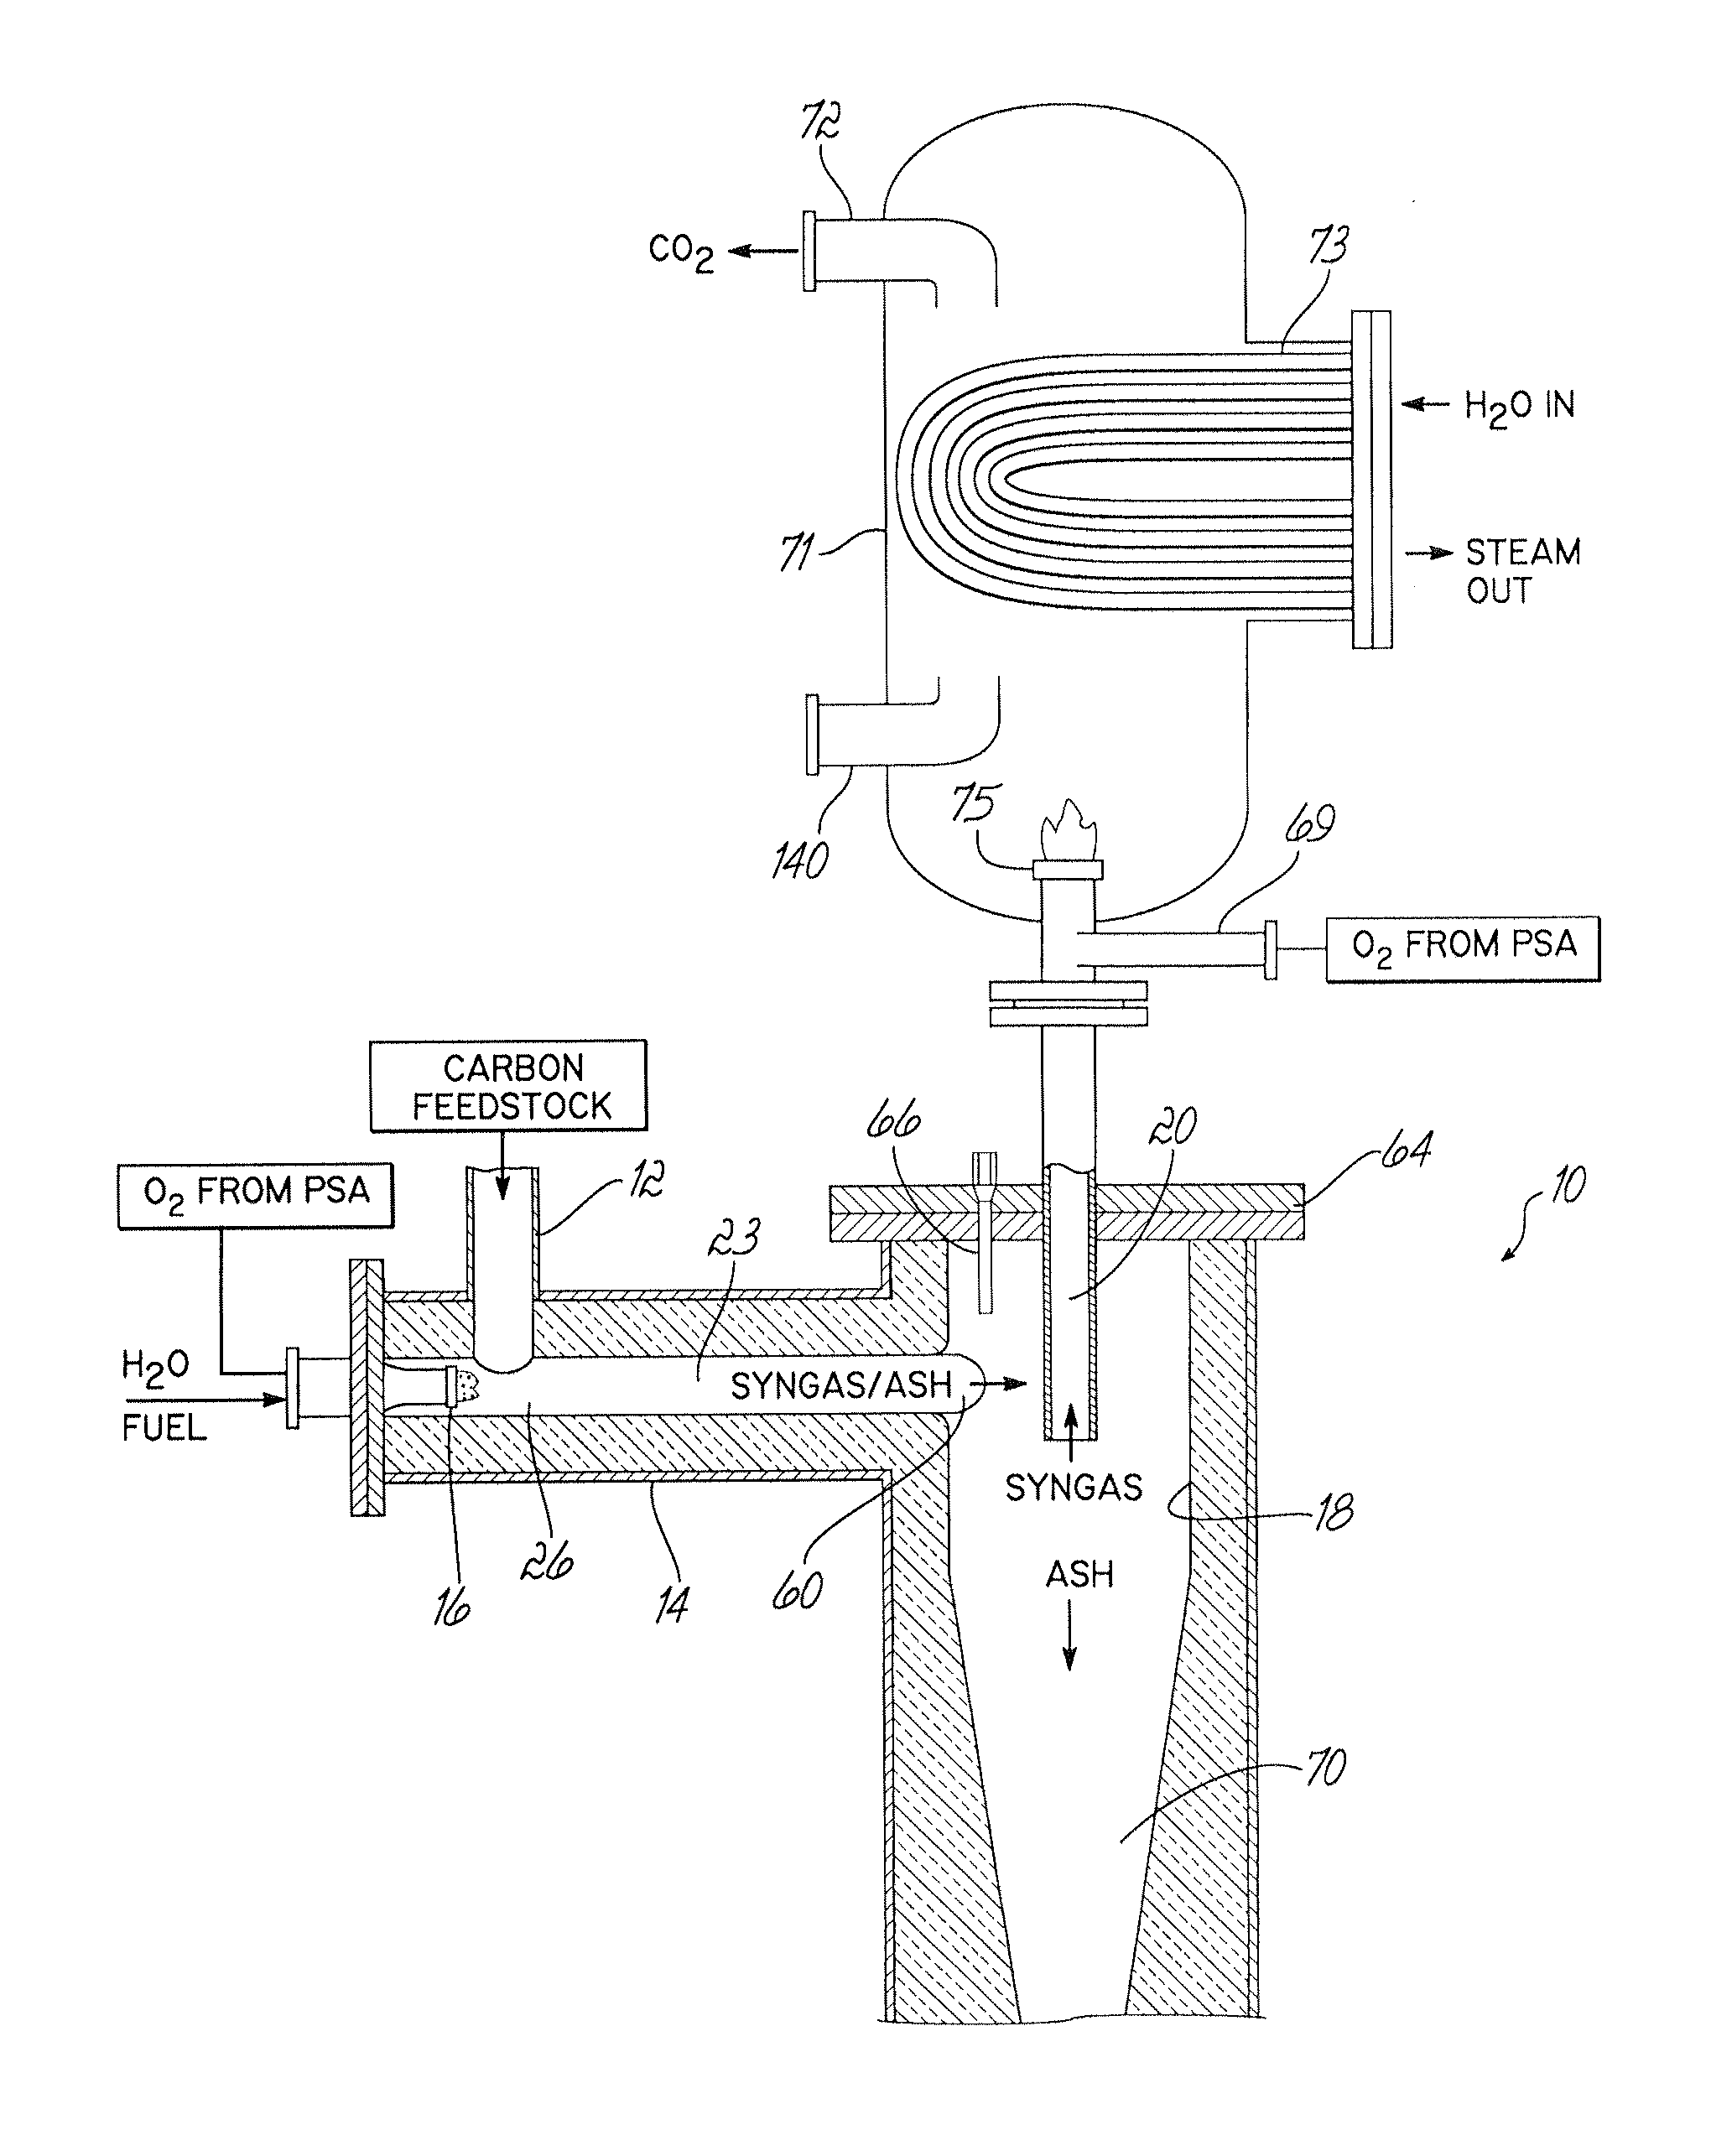 Method of forming and compressing carbon dioxide